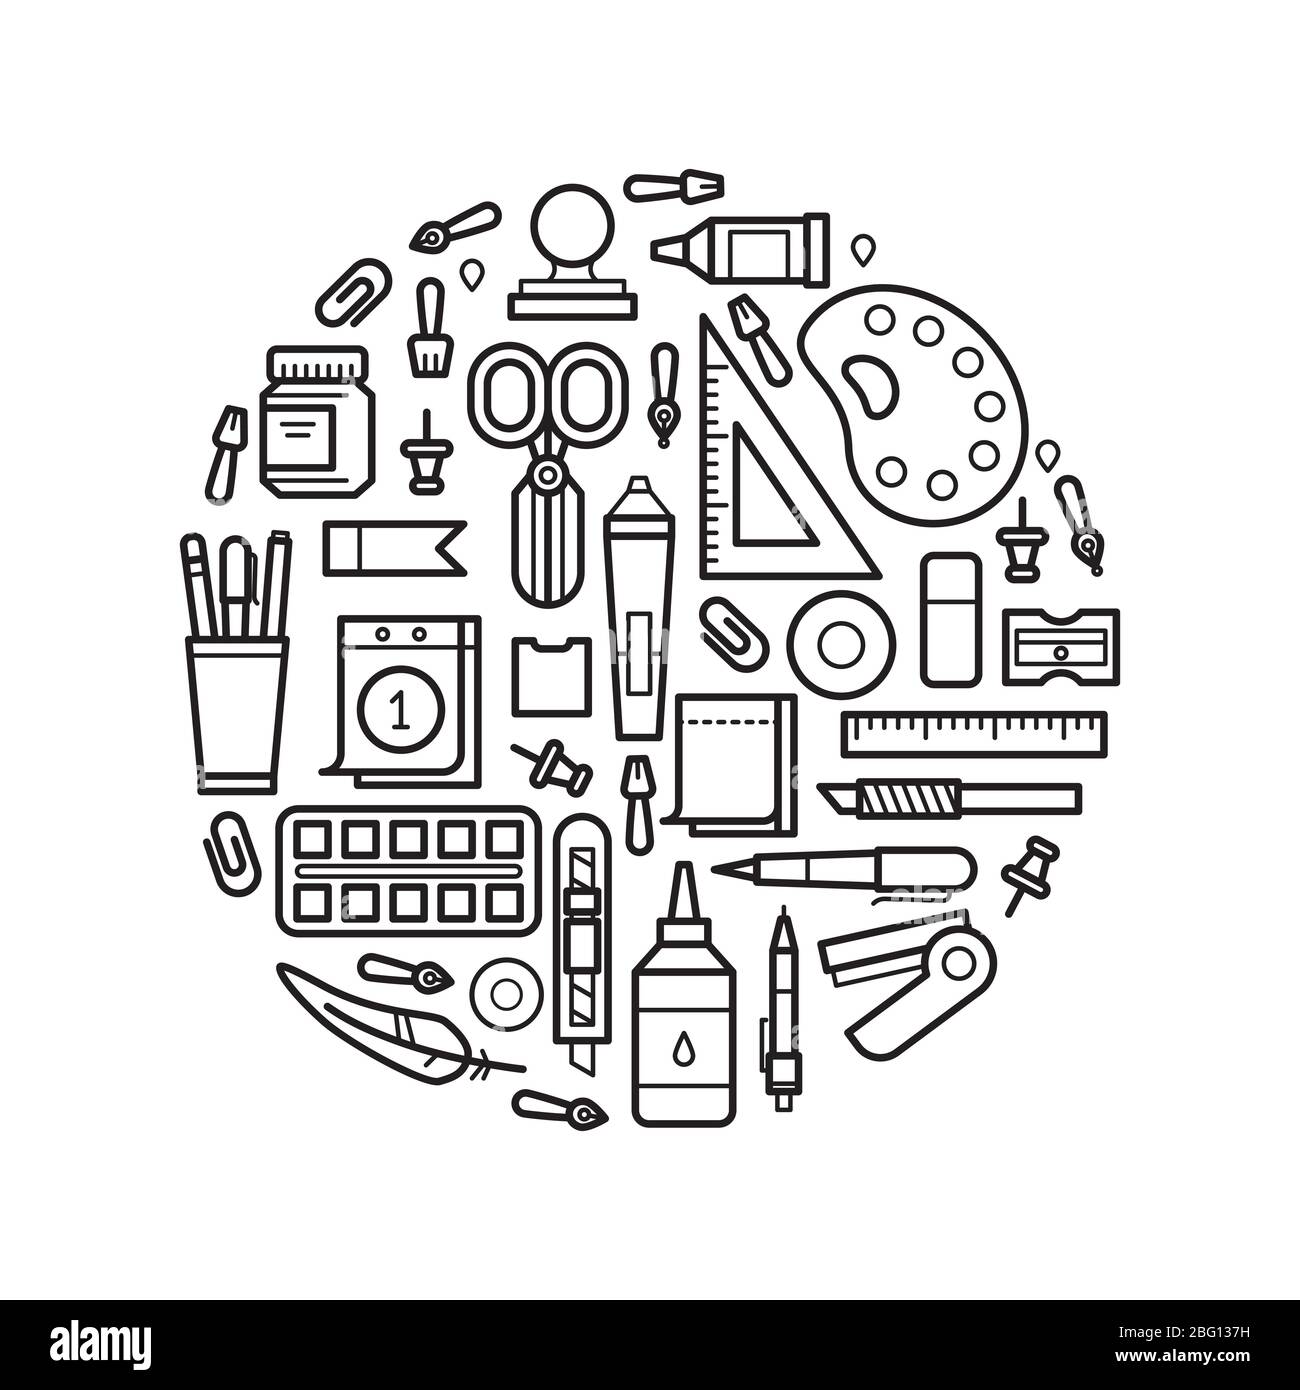 Office stationery linear icons isolated on wihite backgound. Vector illustration Stock Vector